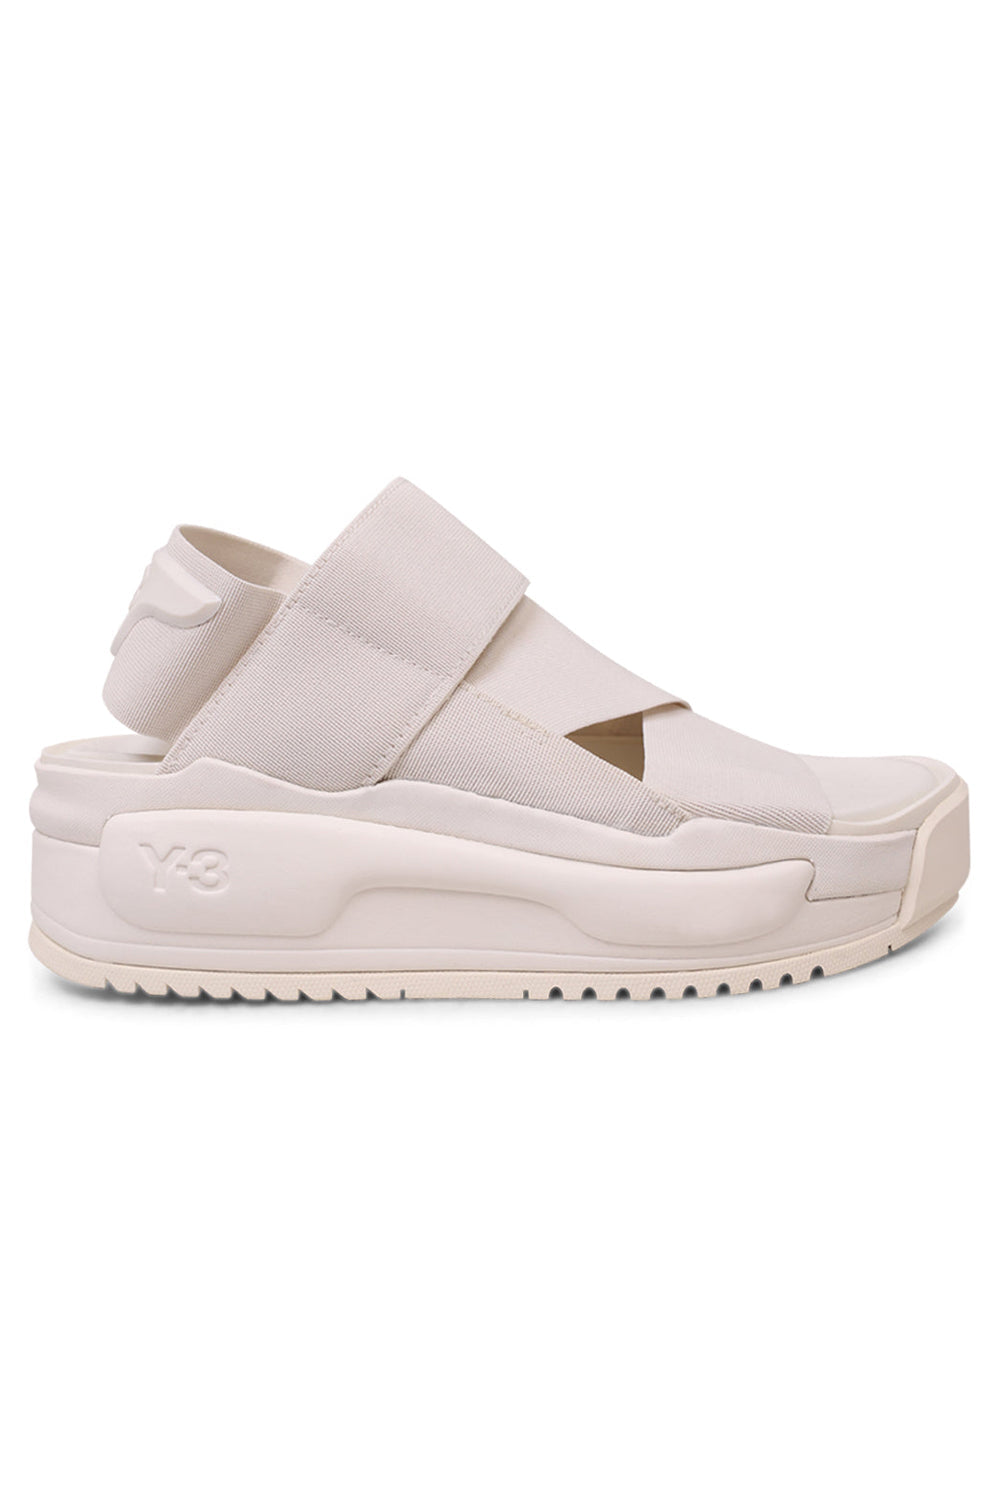 Y-3 SHOES RIVALRY SANDAL | WHITE/OFF WHITE